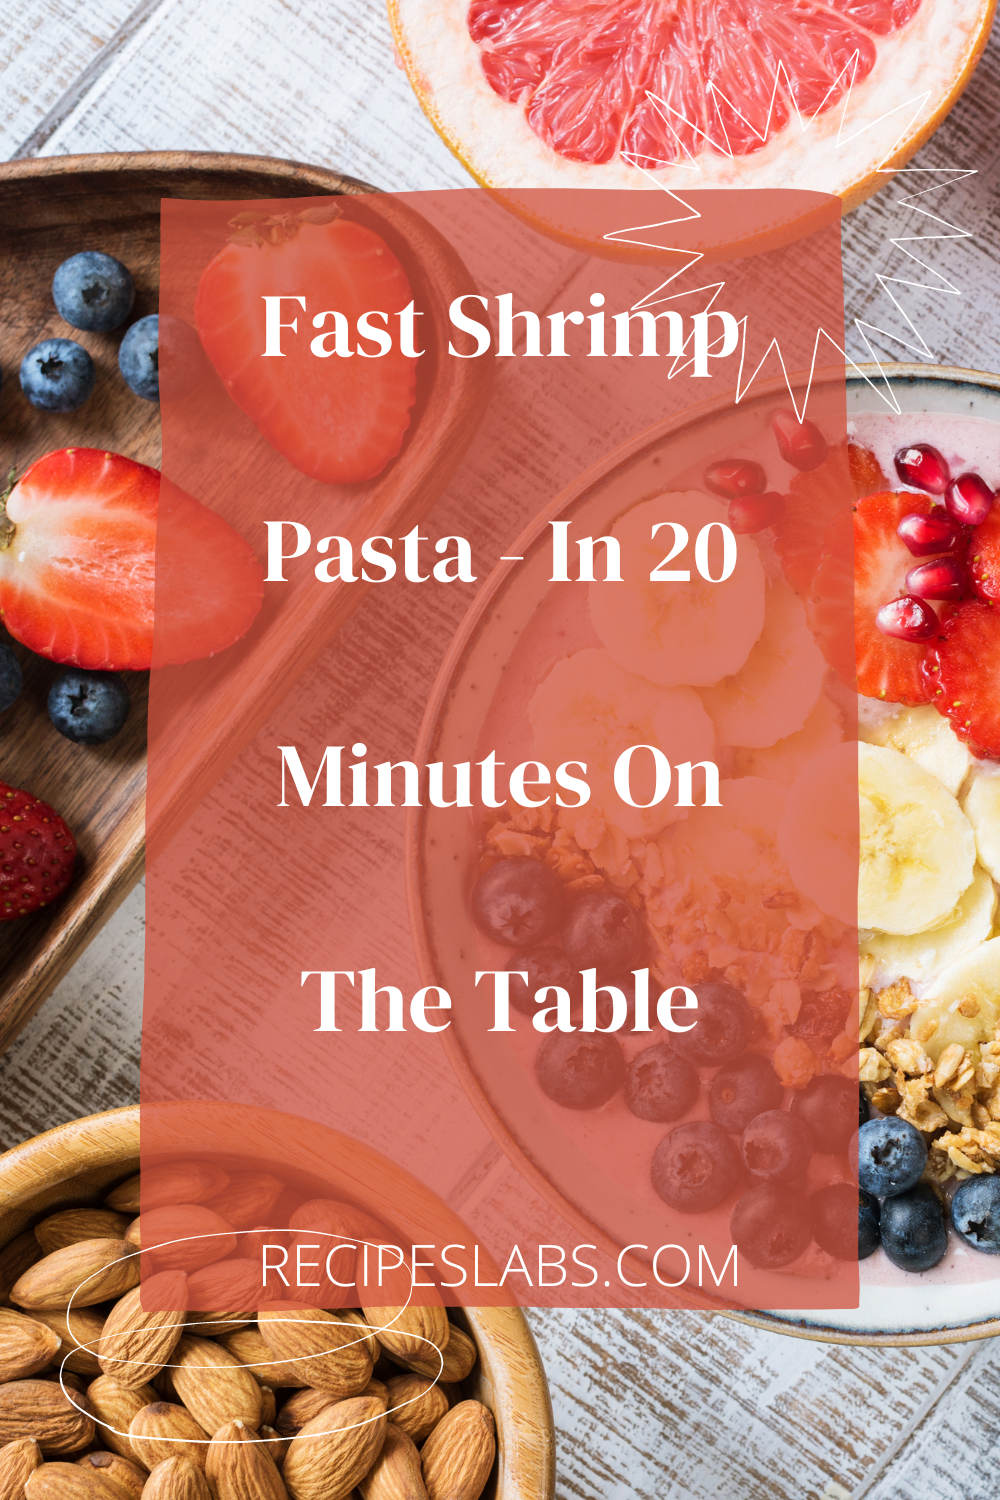 Fast Shrimp Pasta - In 20 Minutes On The Table